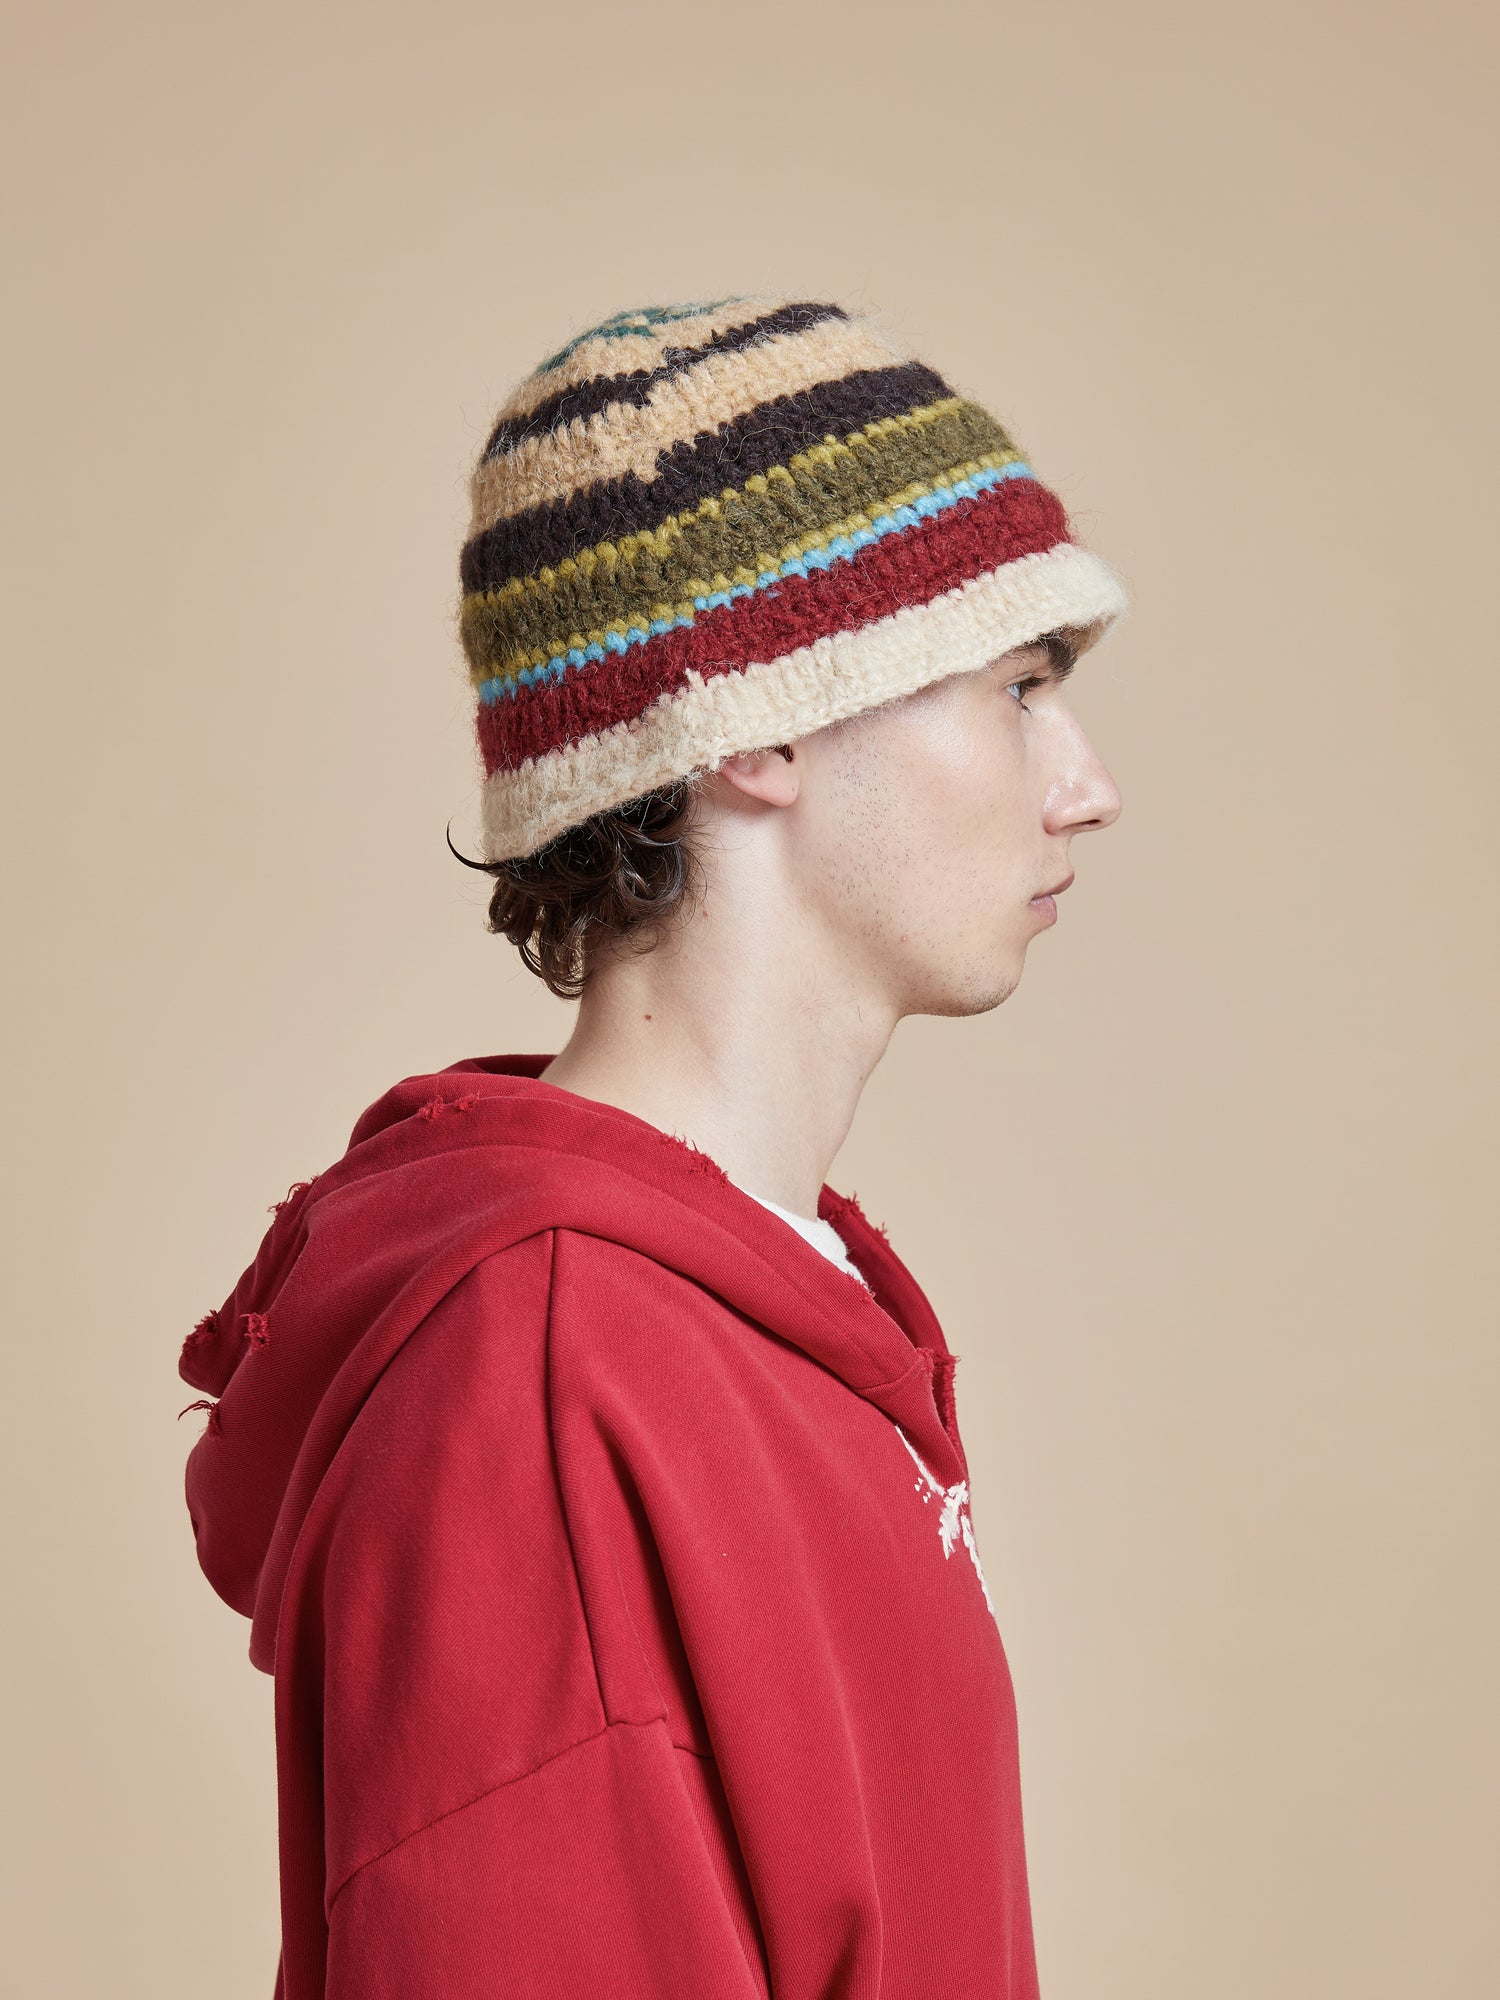 A man wearing a red hoodie with a Found Stripe Knit Beanie hat.